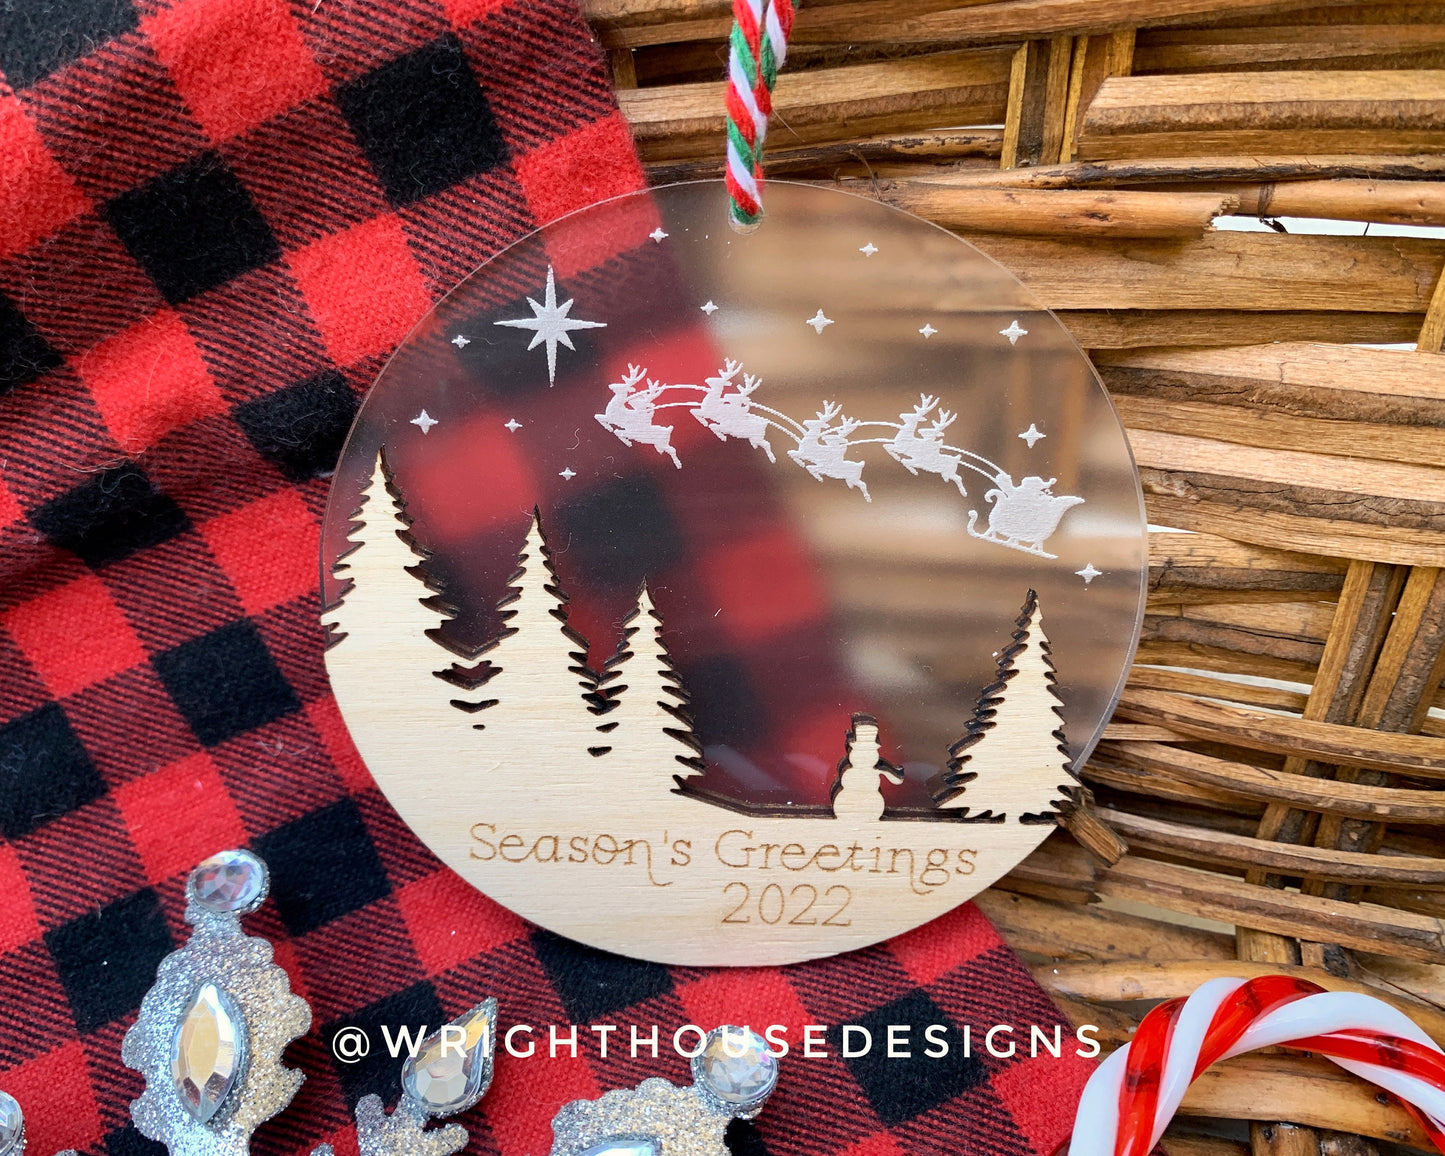 Santa’s Sleigh - Snowman Winter Sky Scene - Yearly Christmas Eve Tree Ornament - Layered Wood and Acrylic - Stocking Tag - Holiday Decor